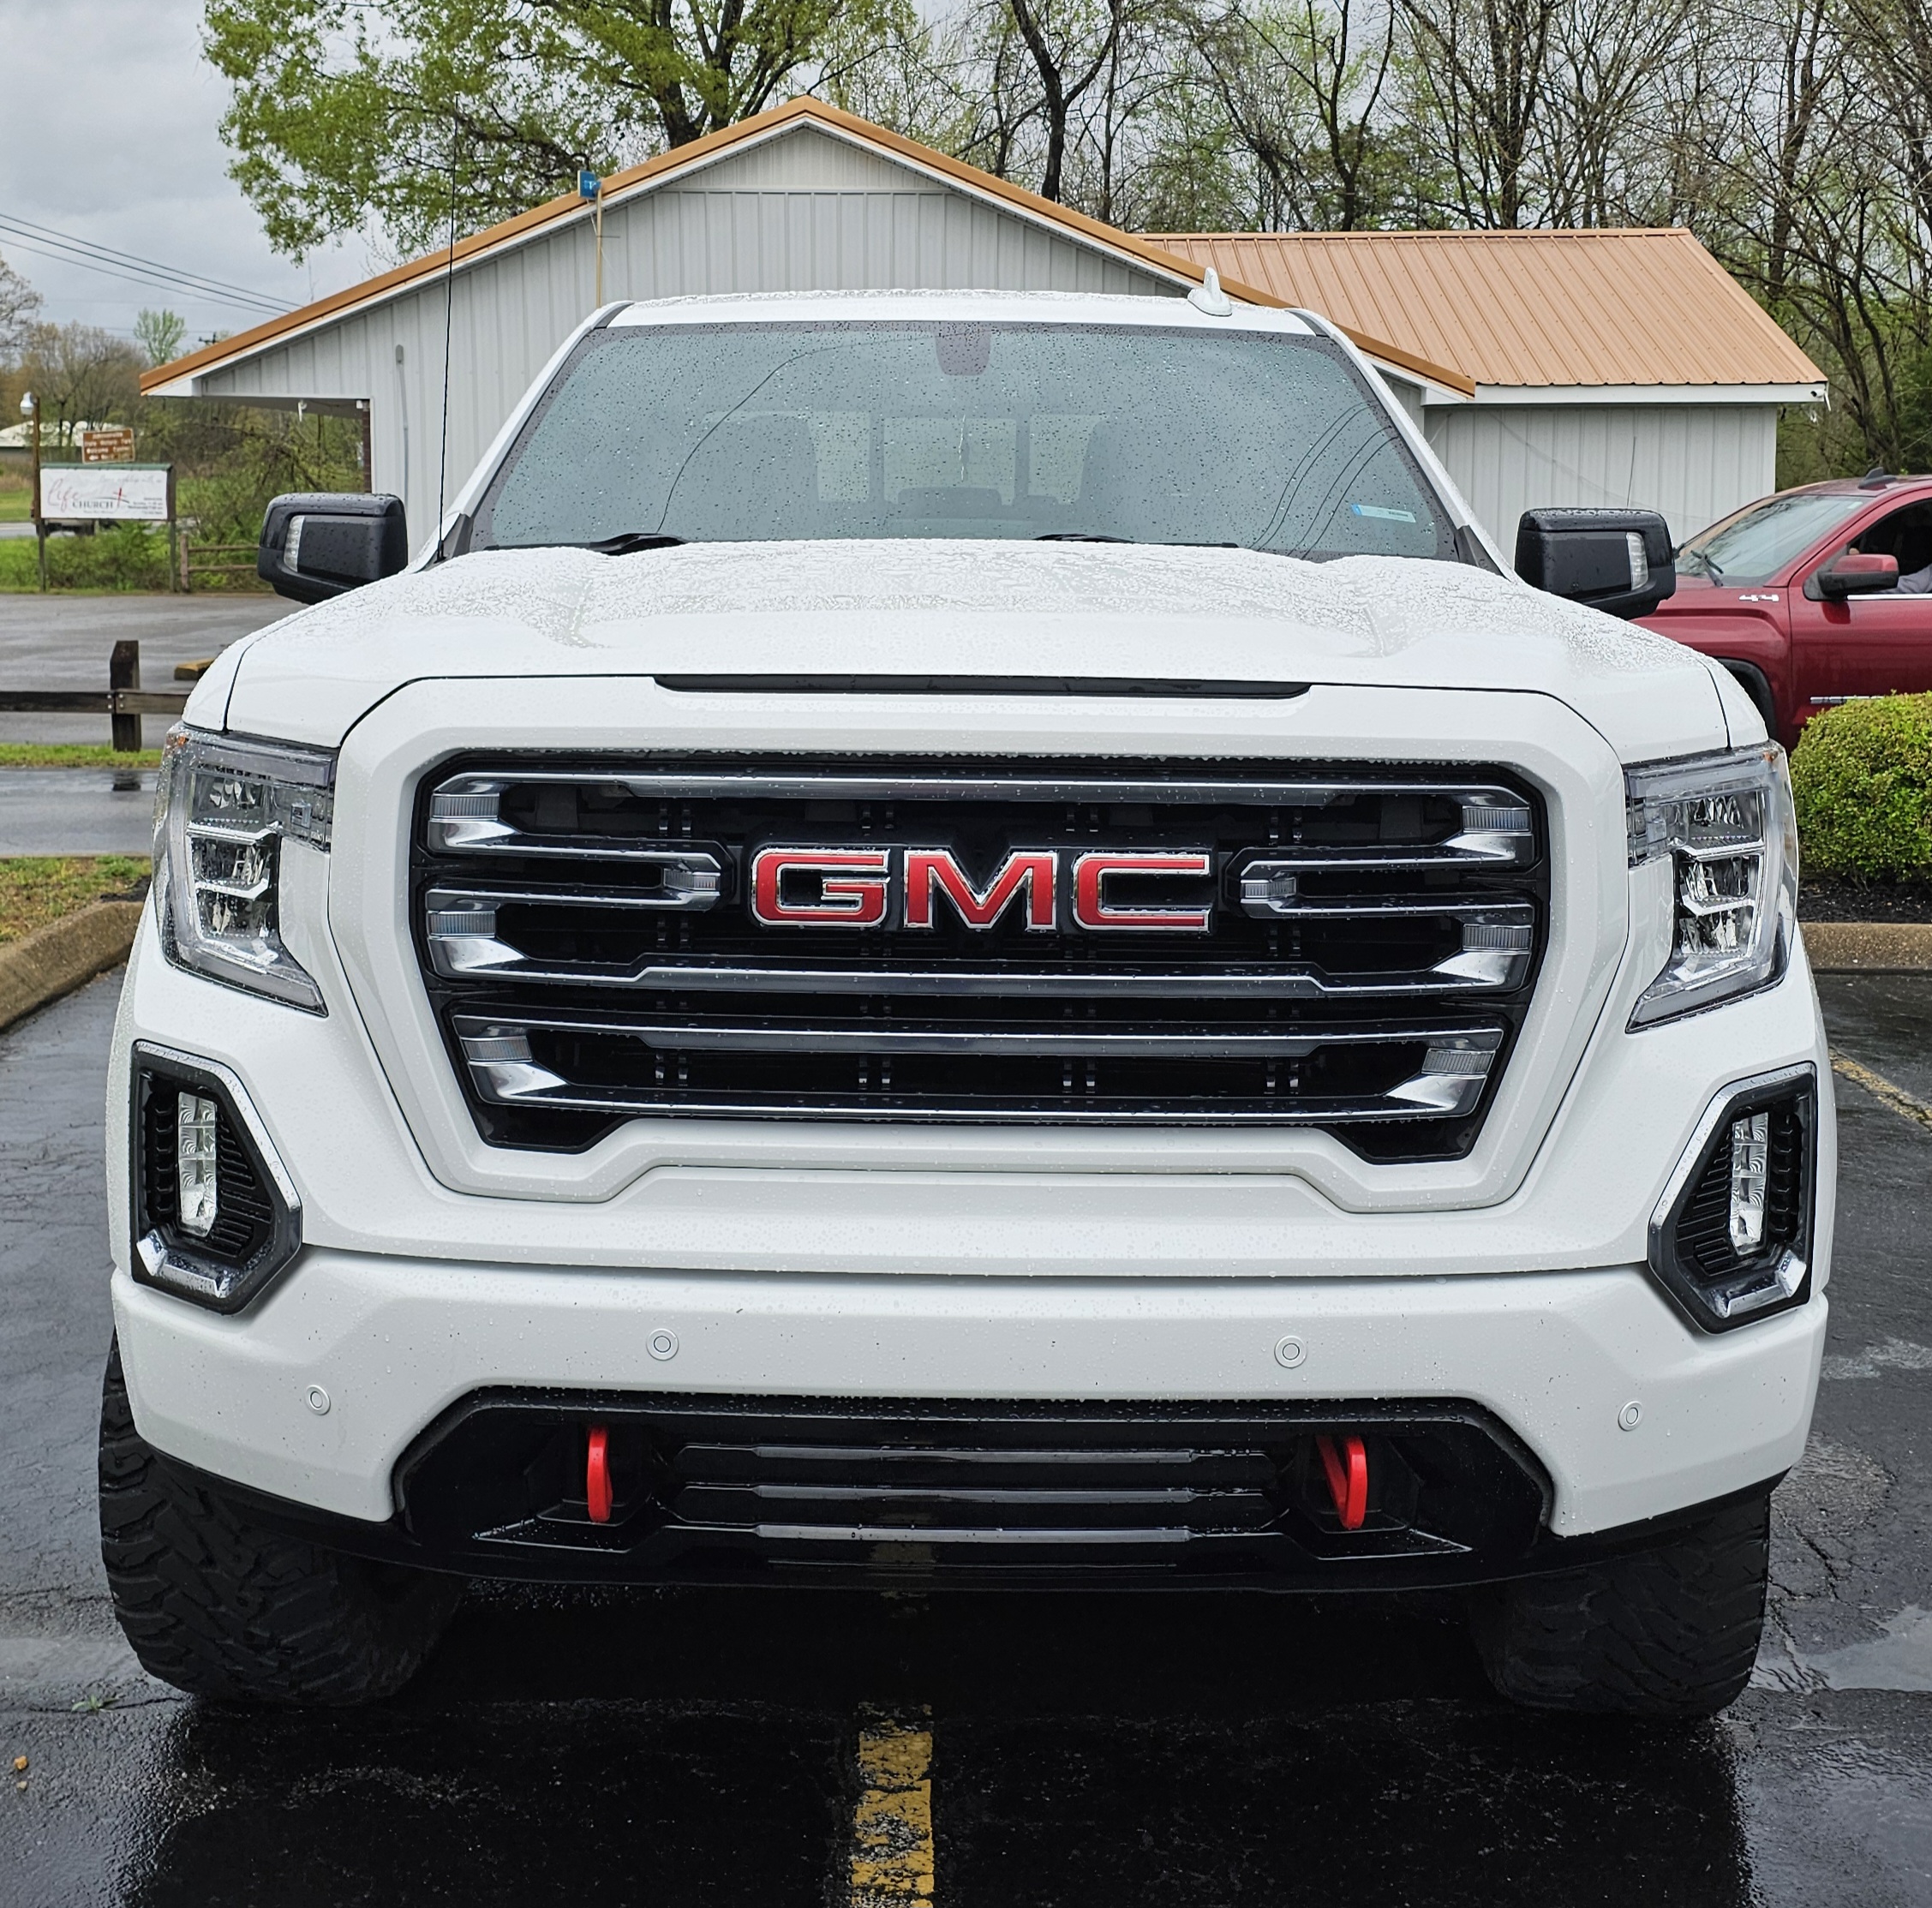 Front grill view of of 2019 GMC Sierra truck